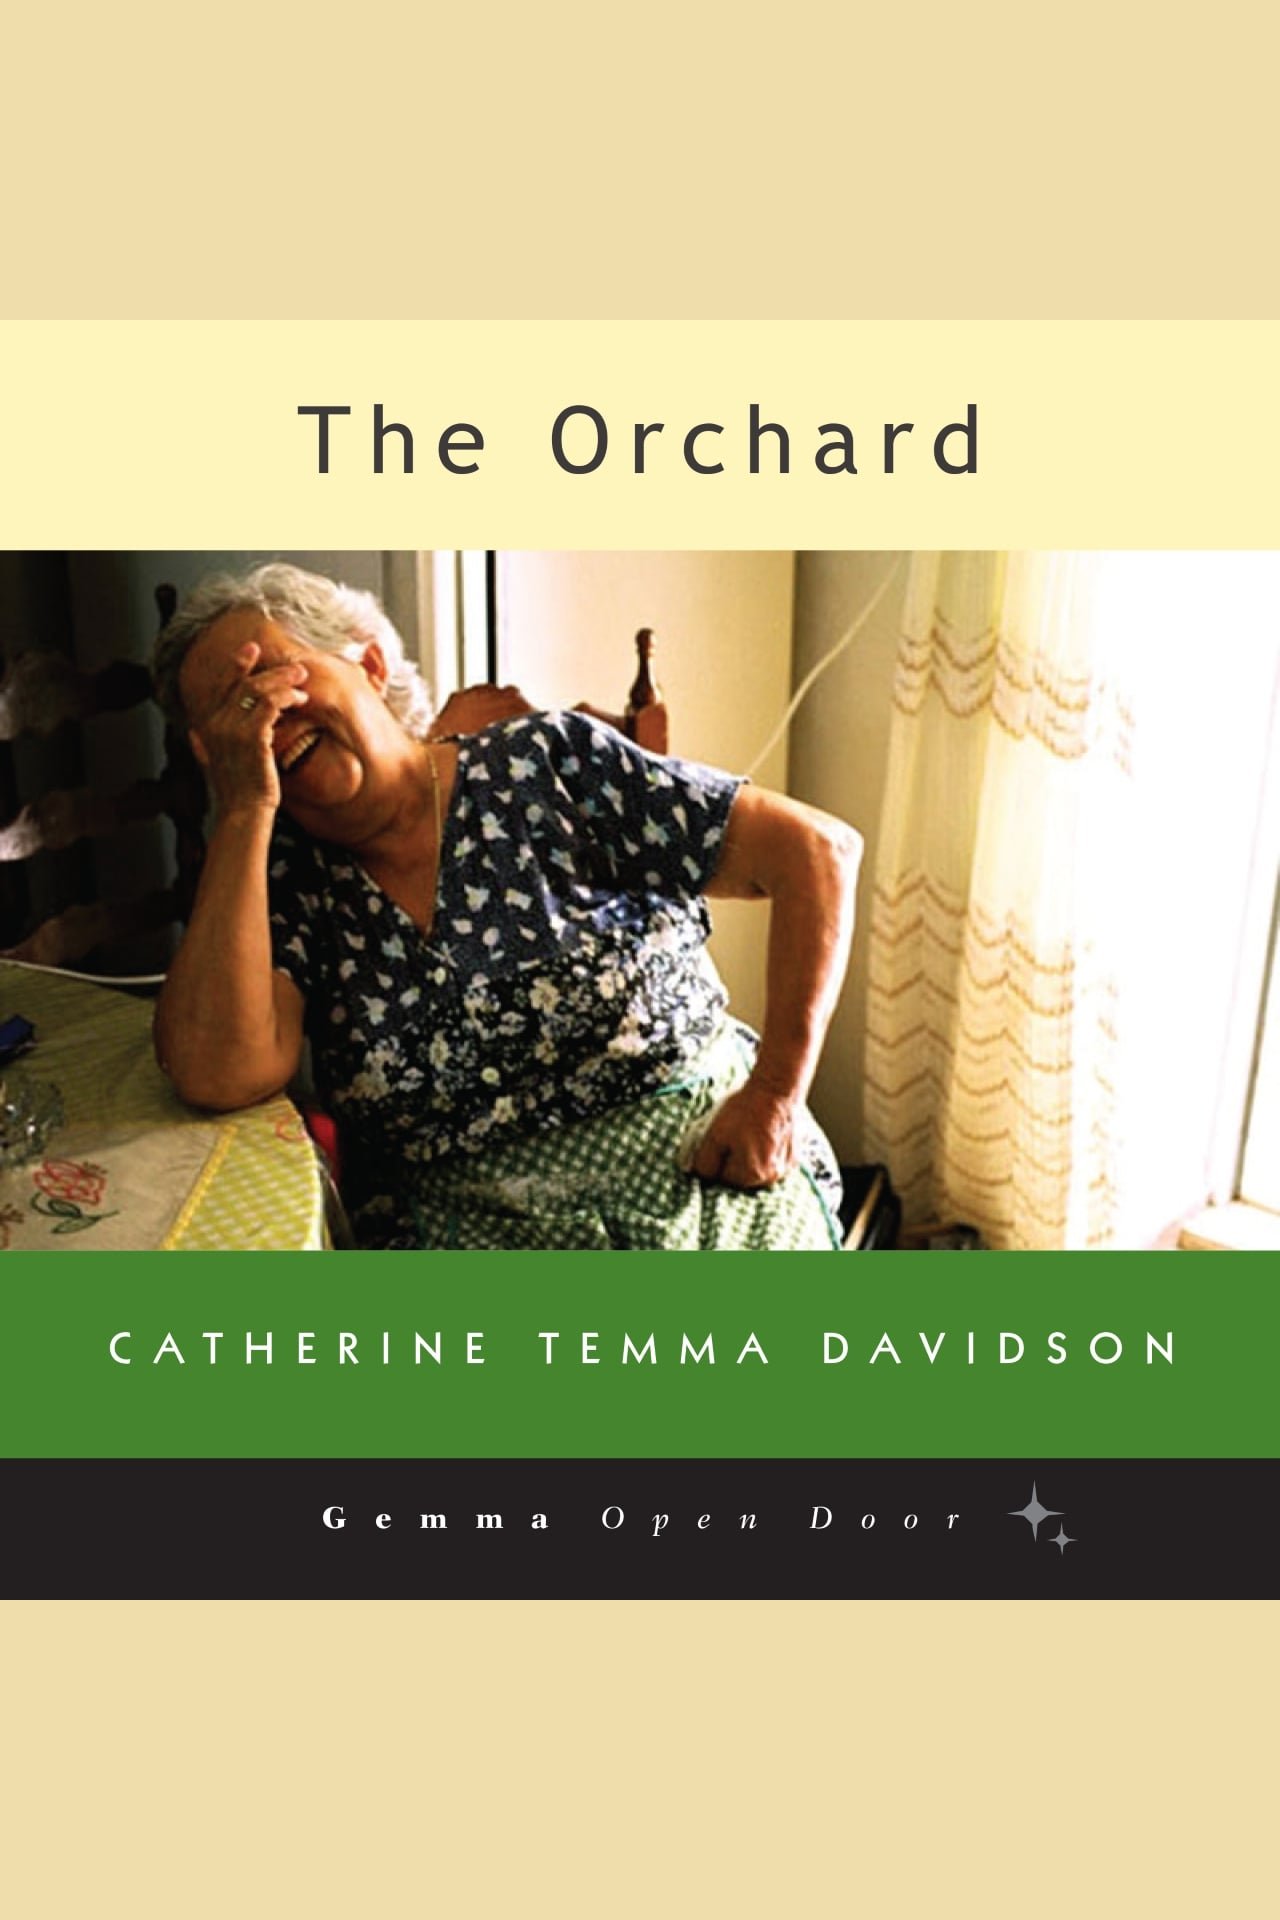 The Orchard Digitally narrated using a synthesized voice cover image